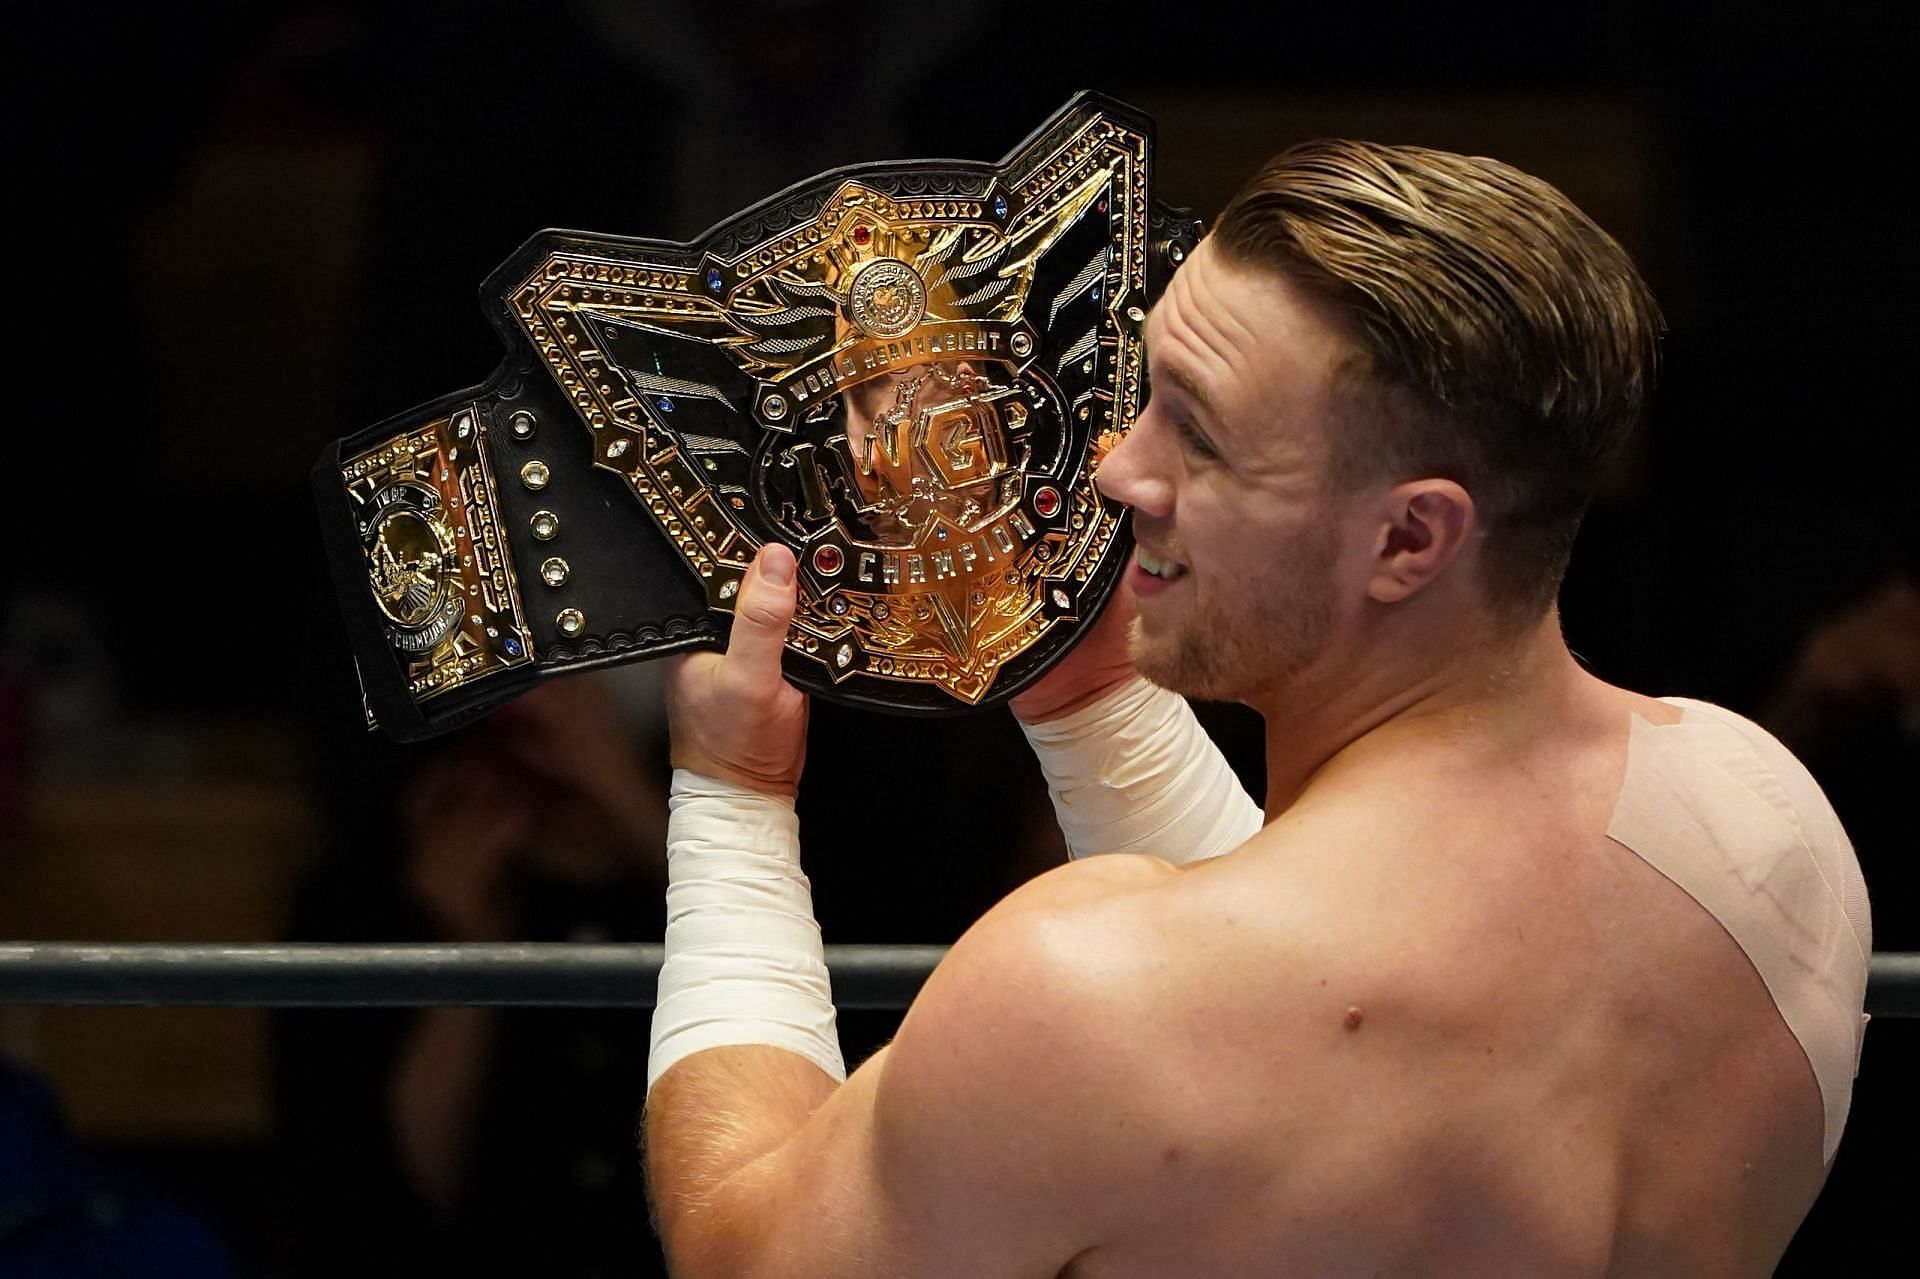 <div></noscript>NJPW President provides update on Will Ospreay's Wrestle Kingdom status after travel ban imposed in Japan</div>